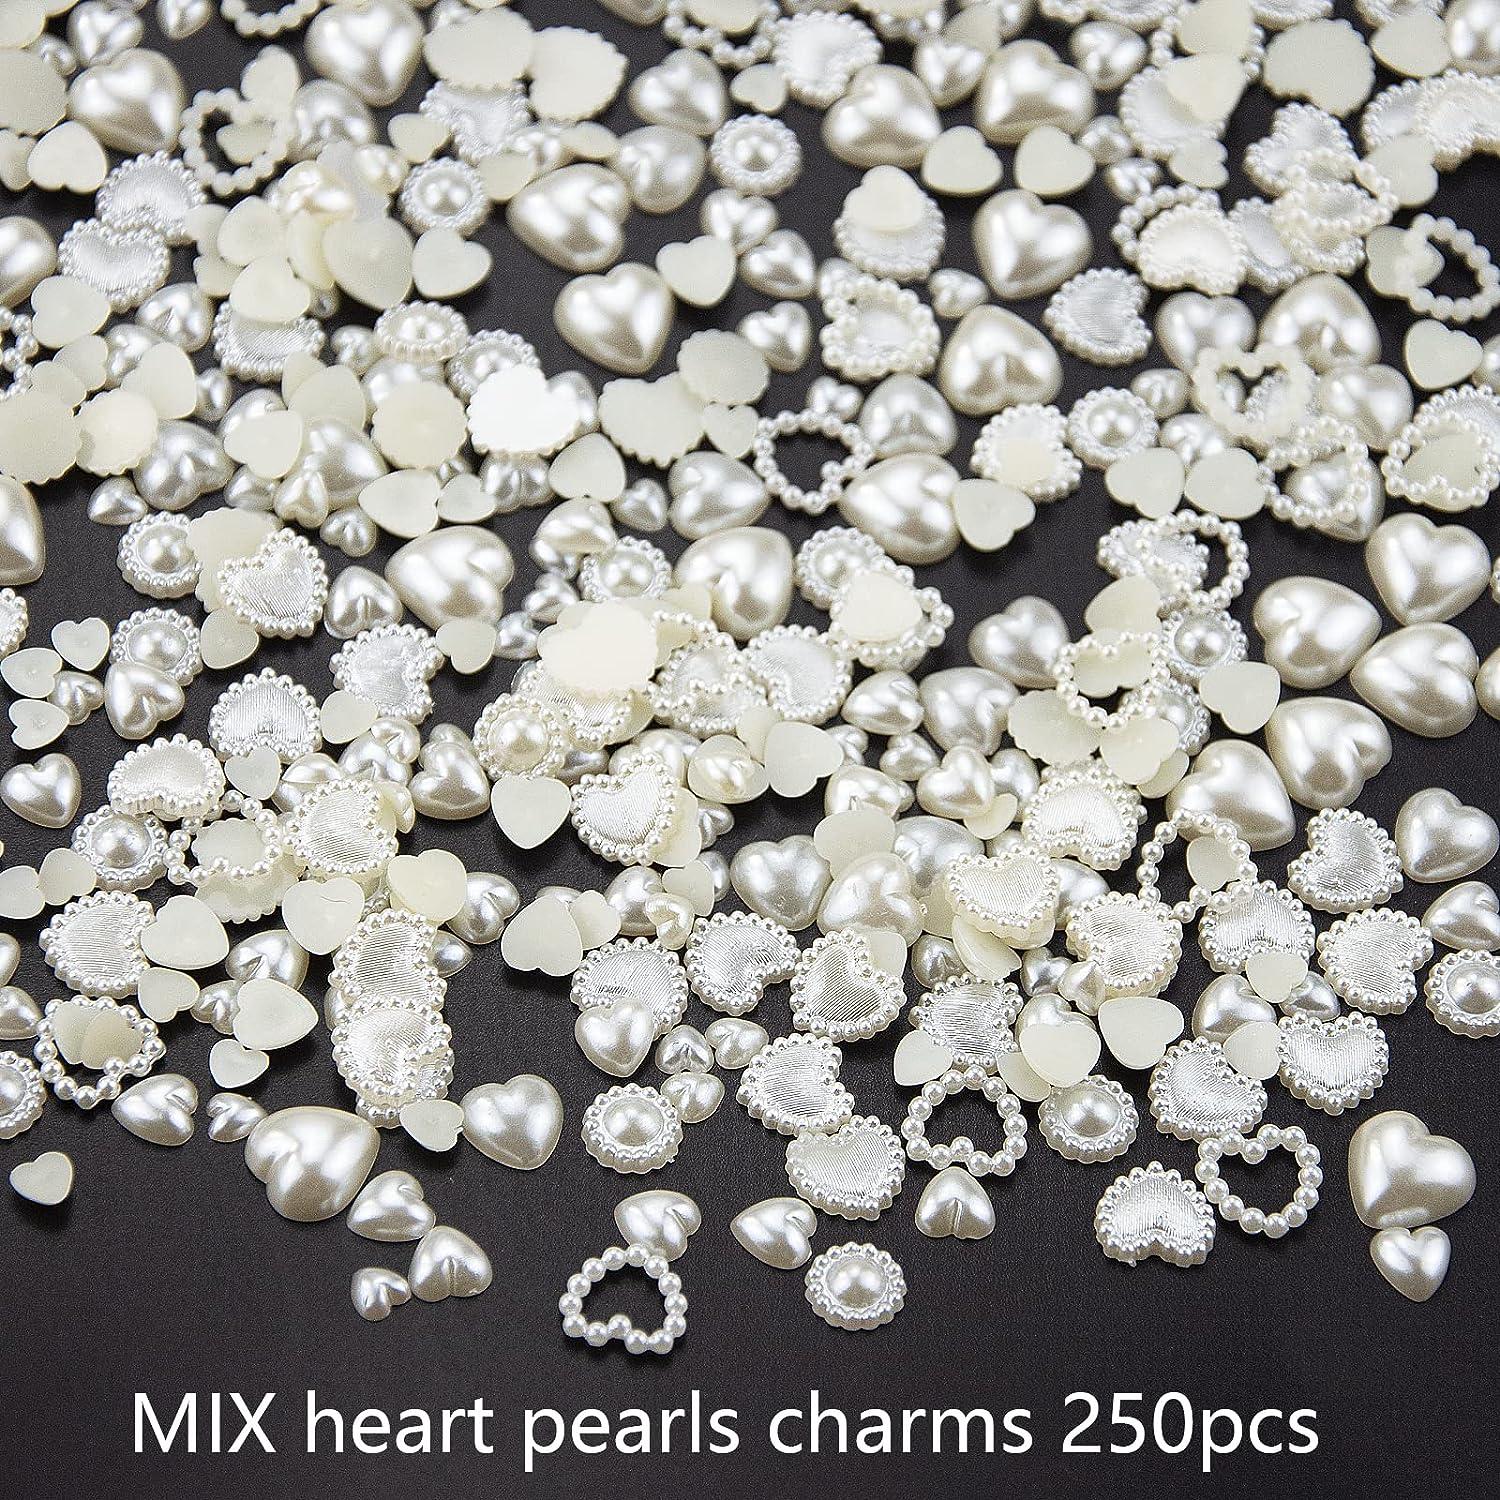 500Pcs Creamy White Pearls 3D Nail Charms Multi Shapes Heart Star